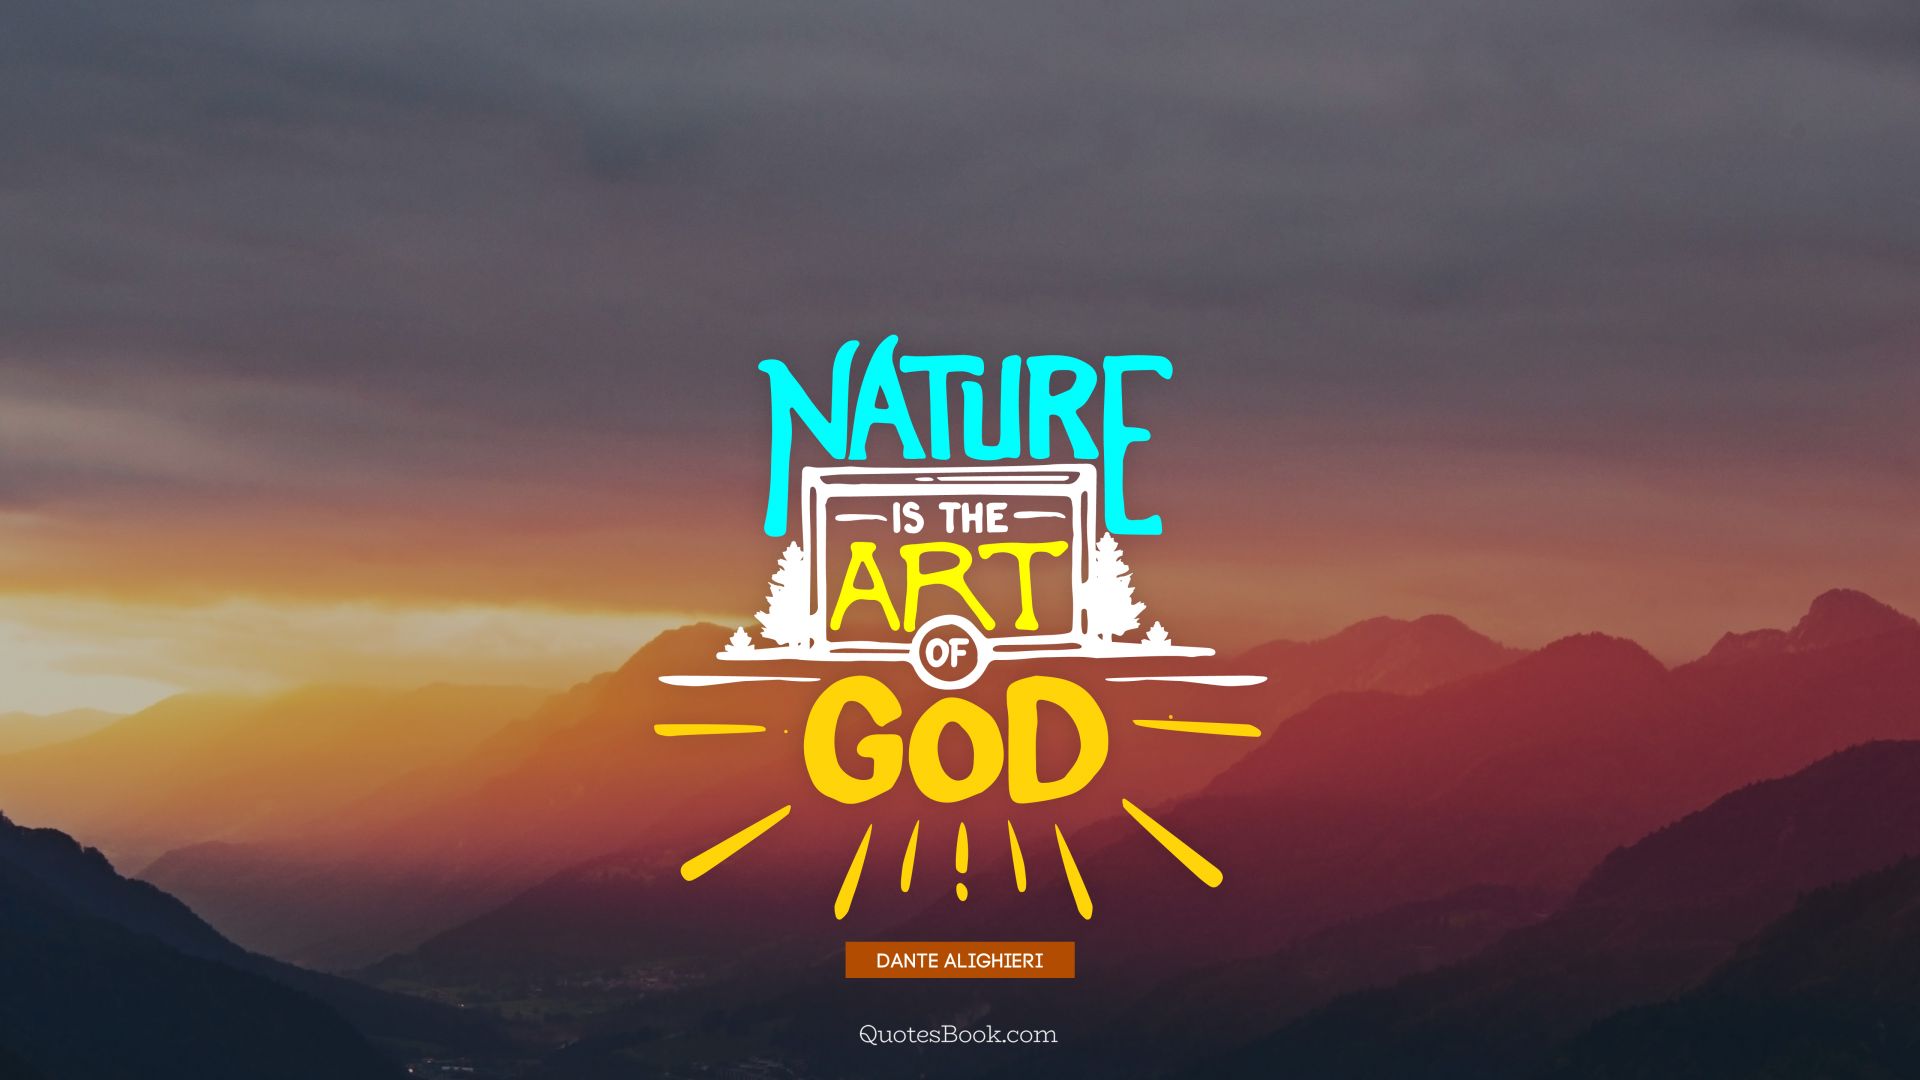 Nature is the art of God. - Quote by Dante Alighieri 